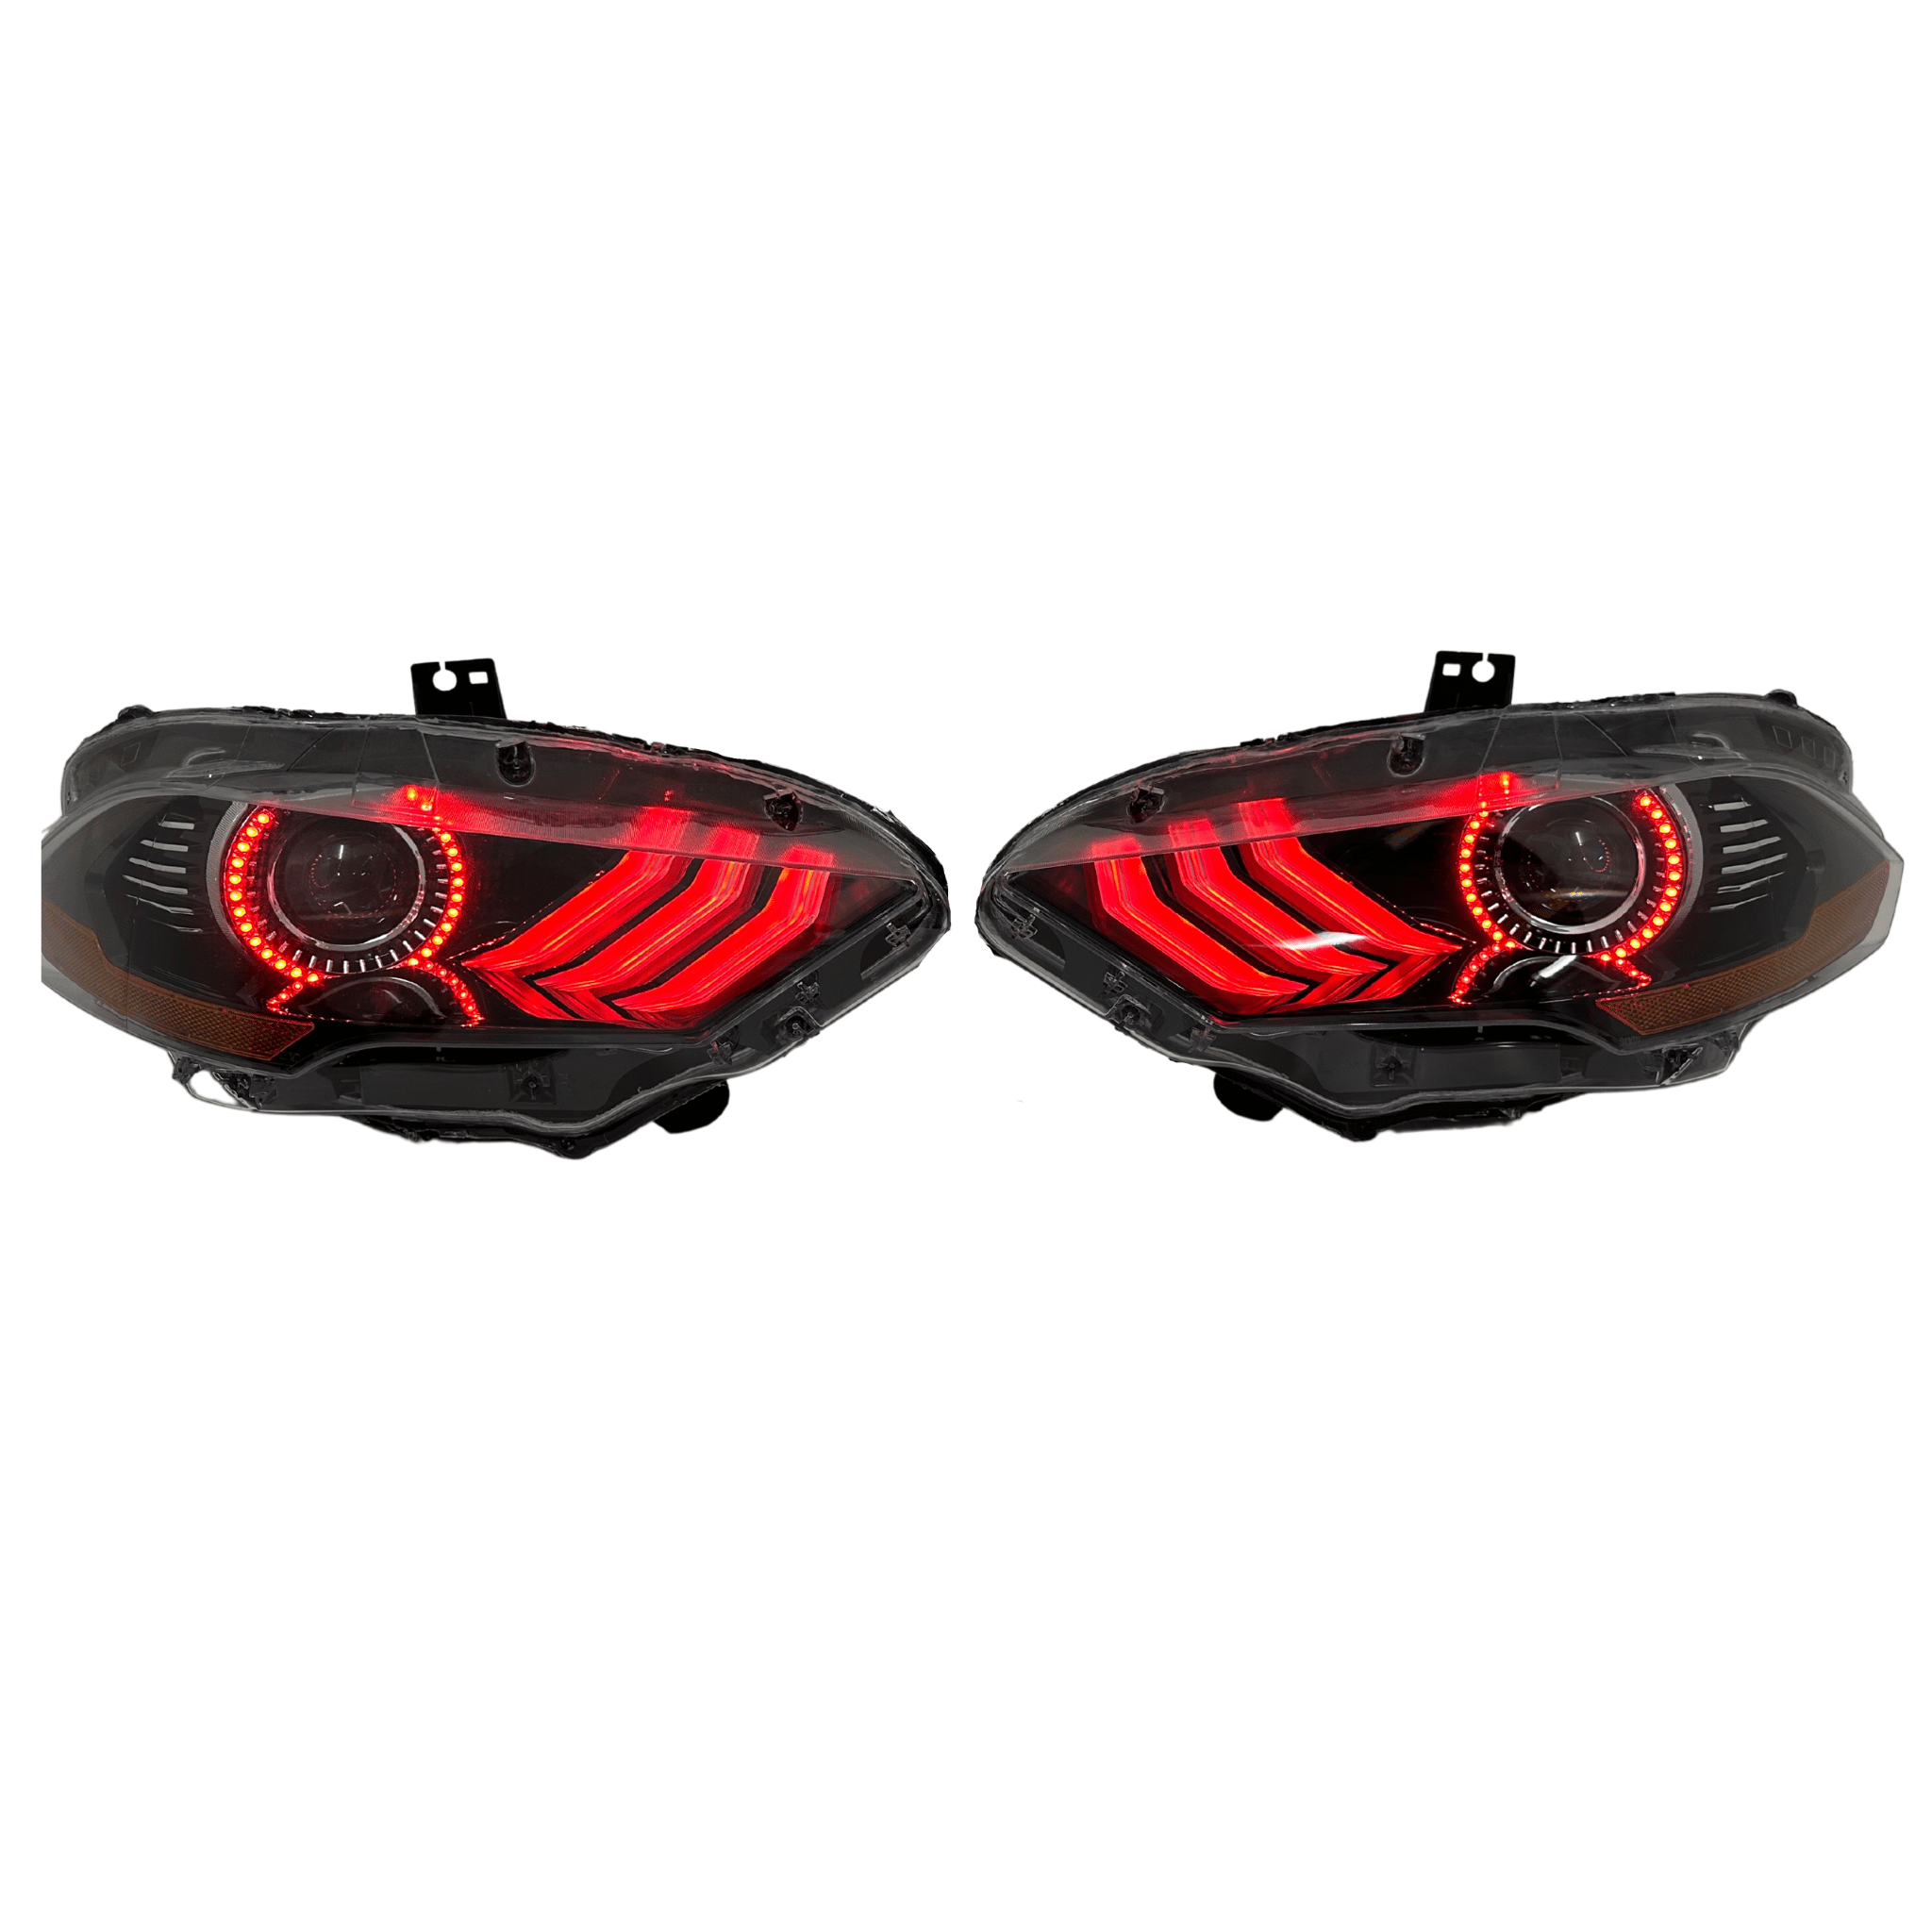 2018-2022 Ford Mustang Prebuilt Headlights - RGB Halo Kits Multicolor Flow Series Color Chasing RGBWA LED headlight kit Oracle Lighting Trendz OneUpLighting Morimoto theretrofitsource AutoLEDTech Diode Dynamics